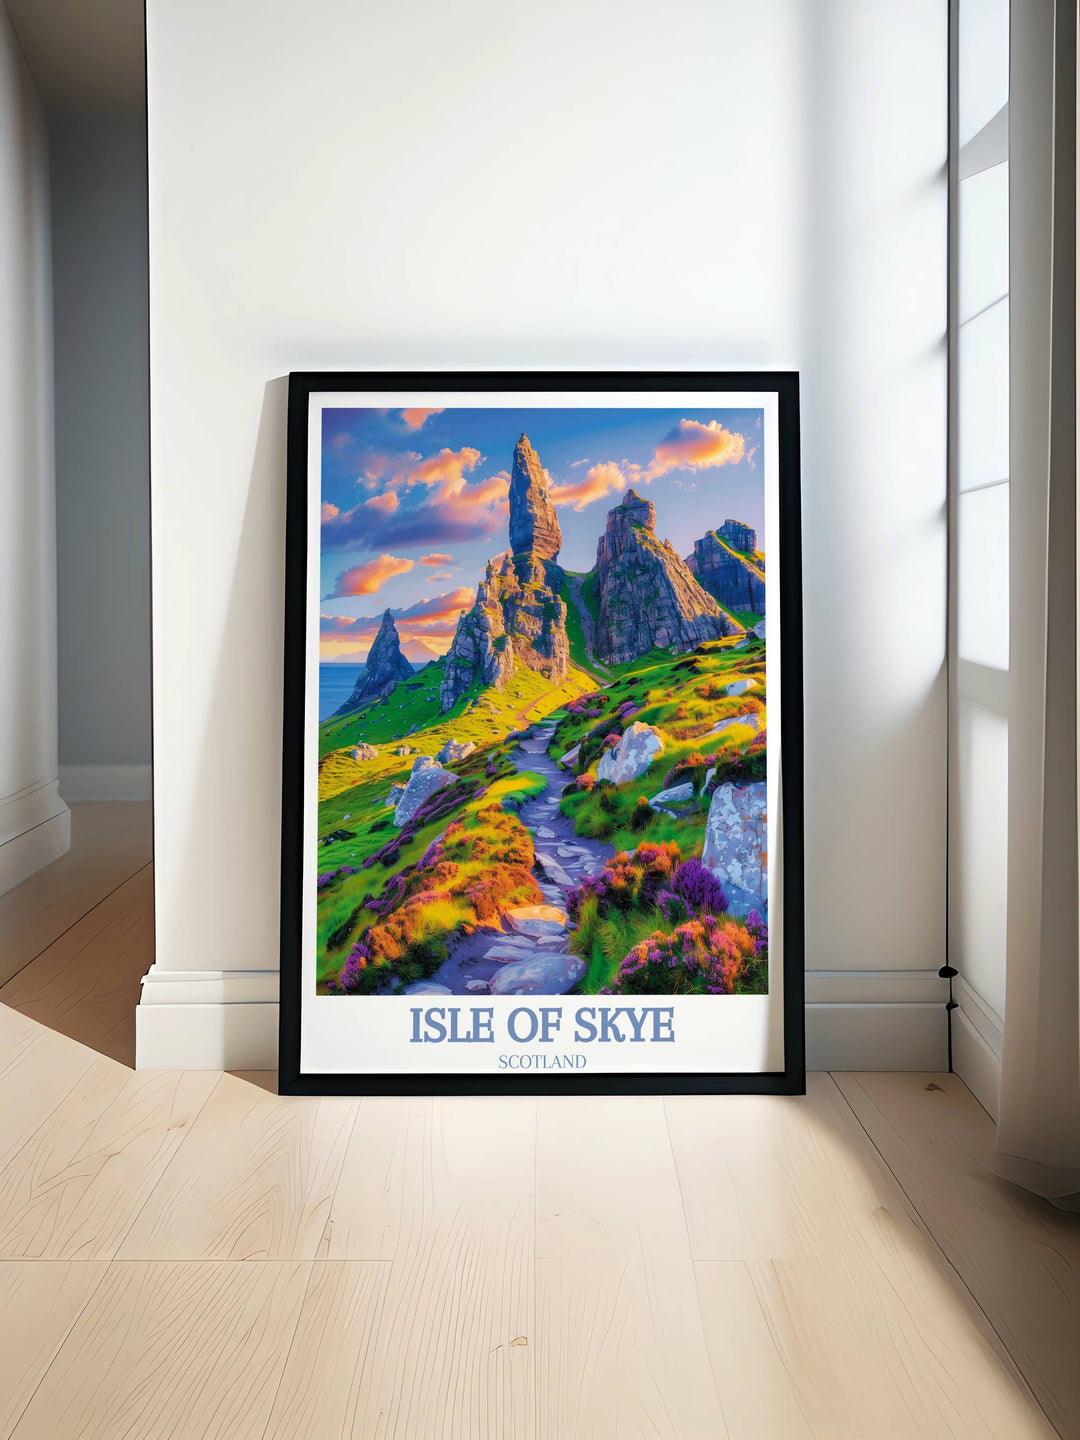 A vibrant Isle of Skye print capturing the dramatic cliffs of The Storr, perfect for adding a touch of Scottish natural beauty to any room decor.